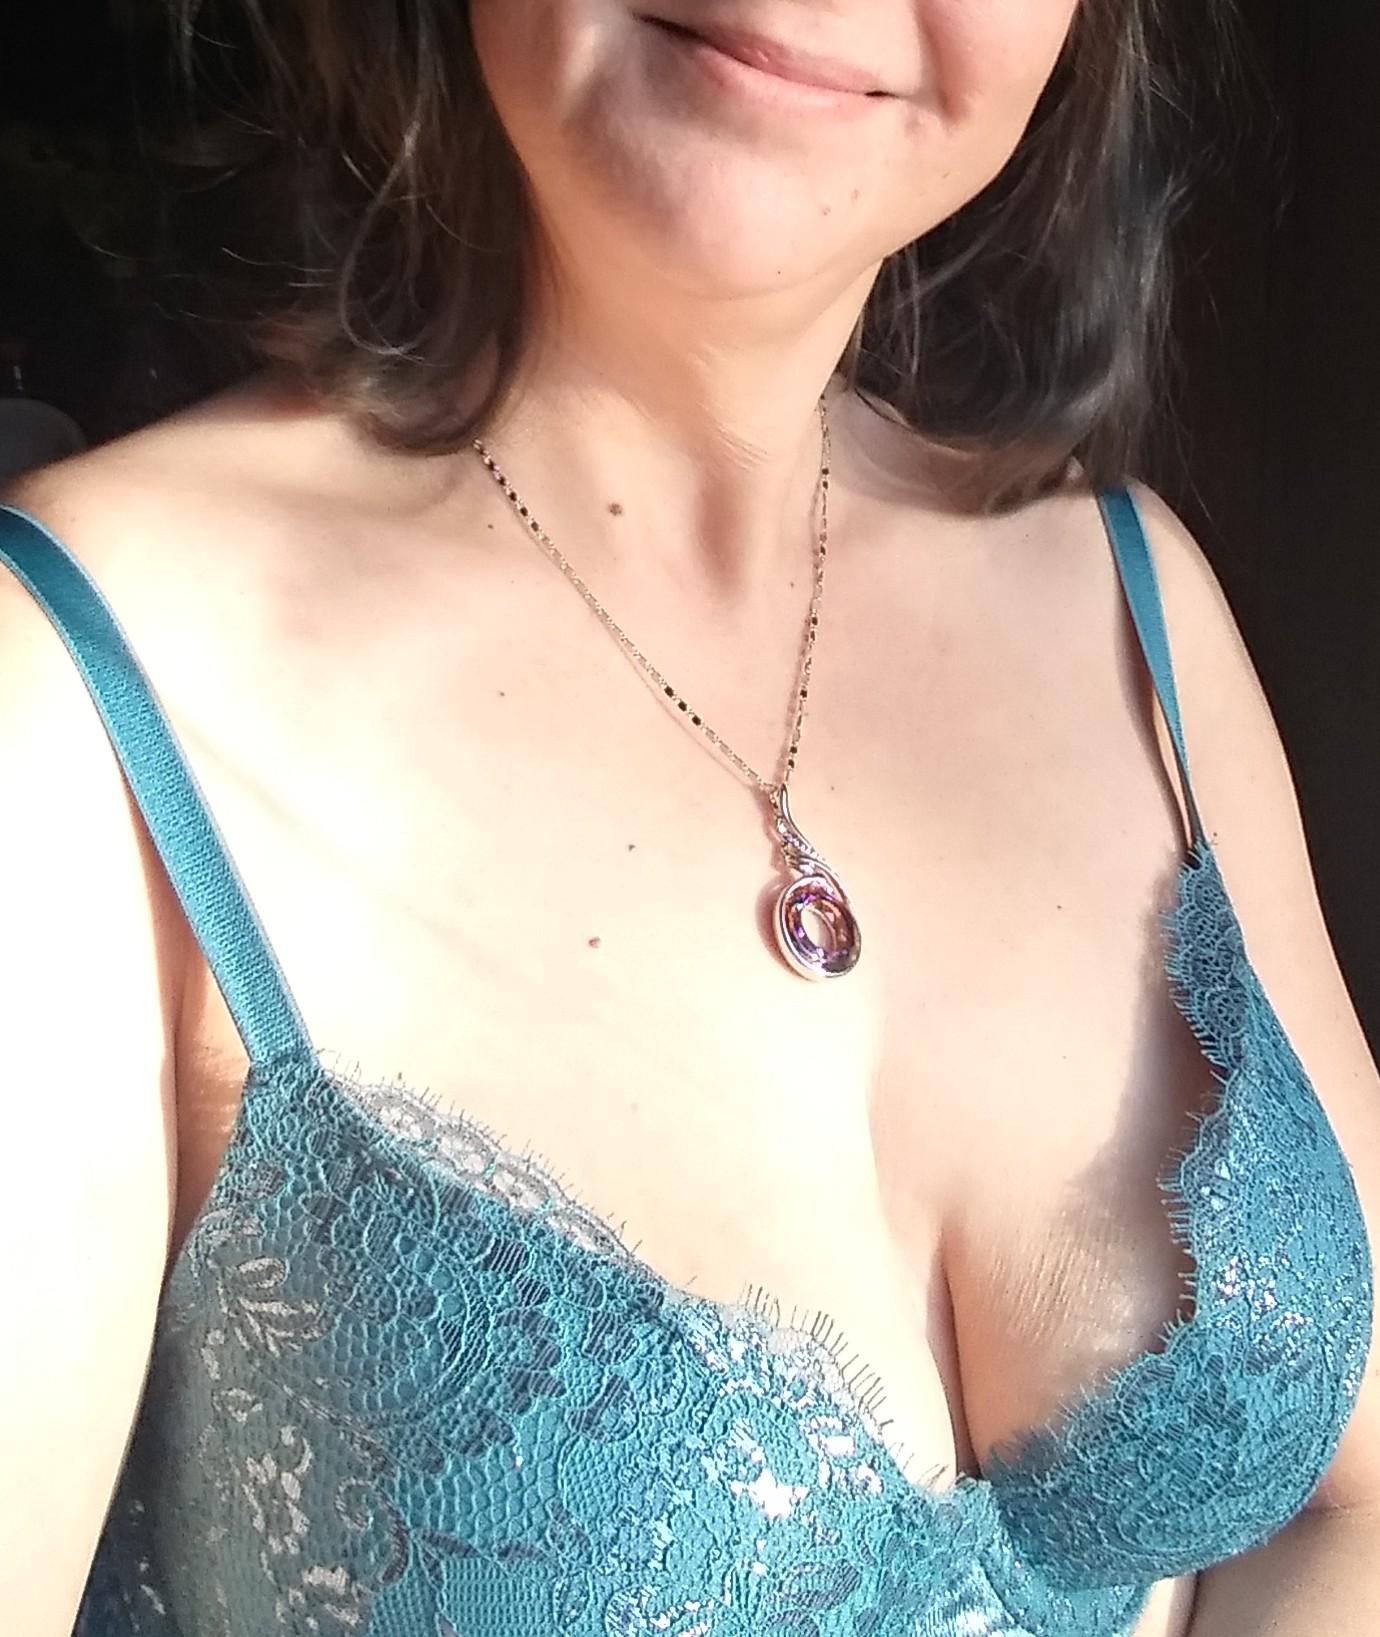 I wanted to show off my new pushup bra (f)or you. 38 year old mom NSFW